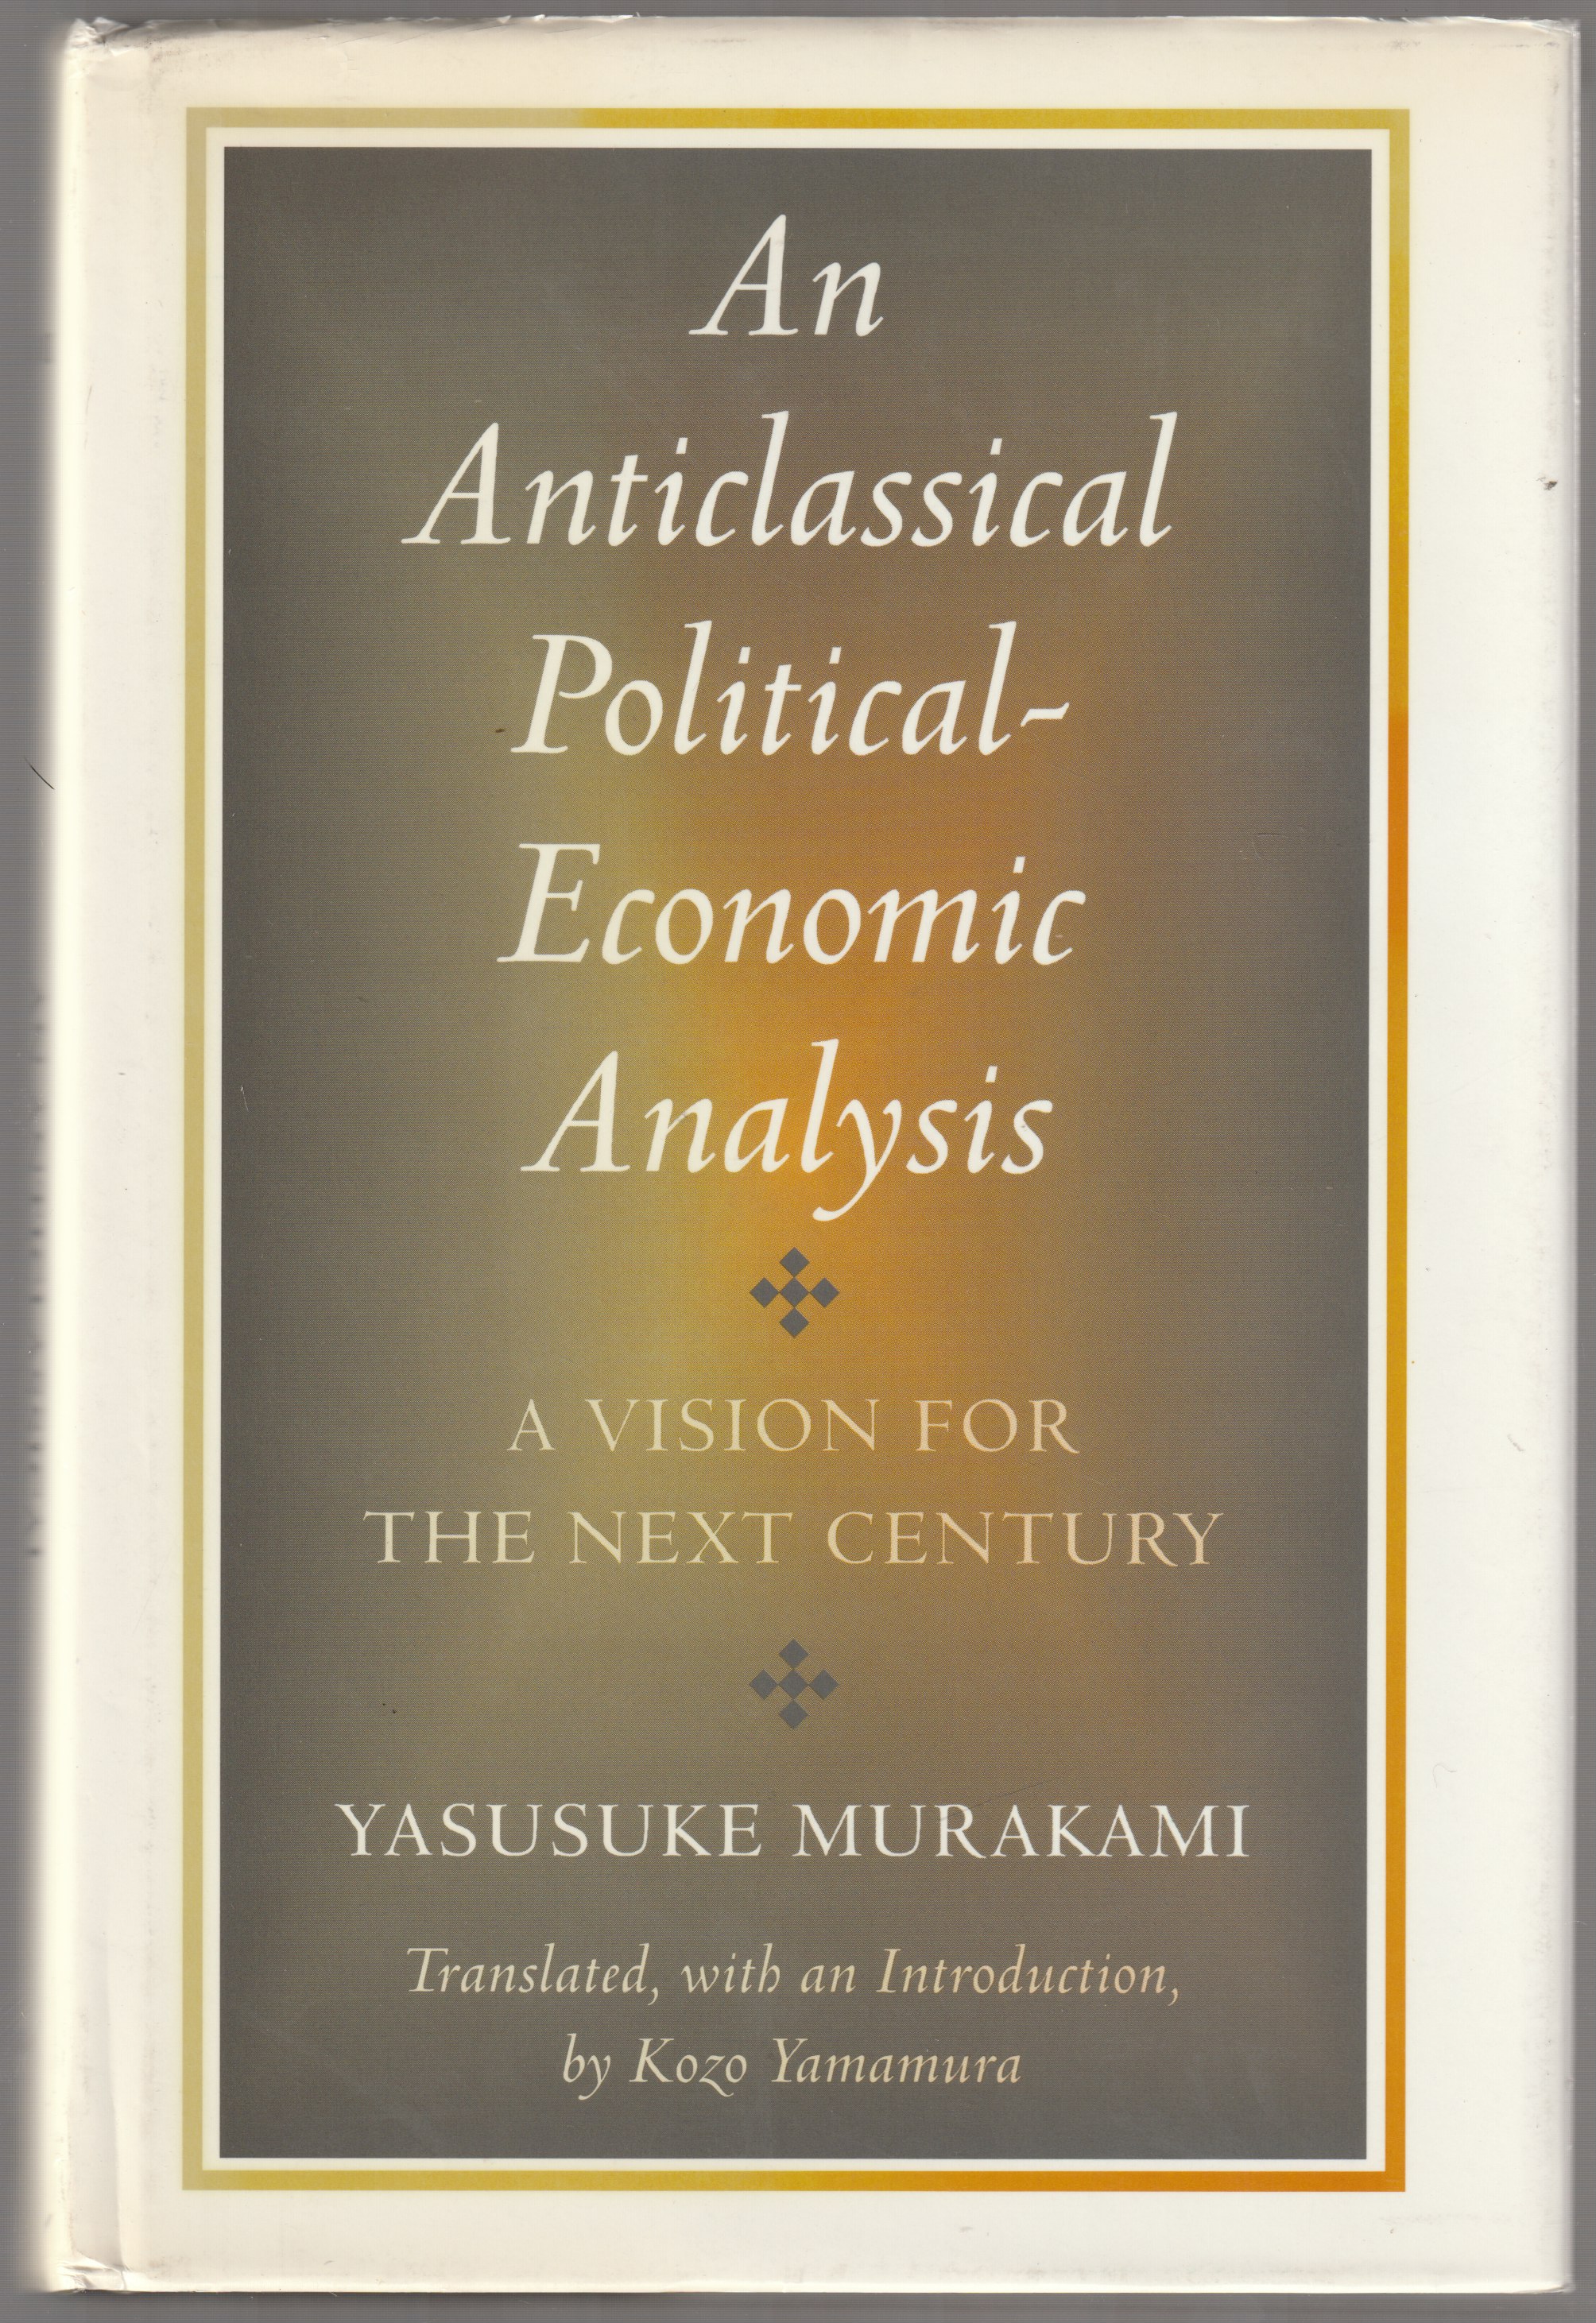 An anticlassical political-economic analysis : a vision for the next century